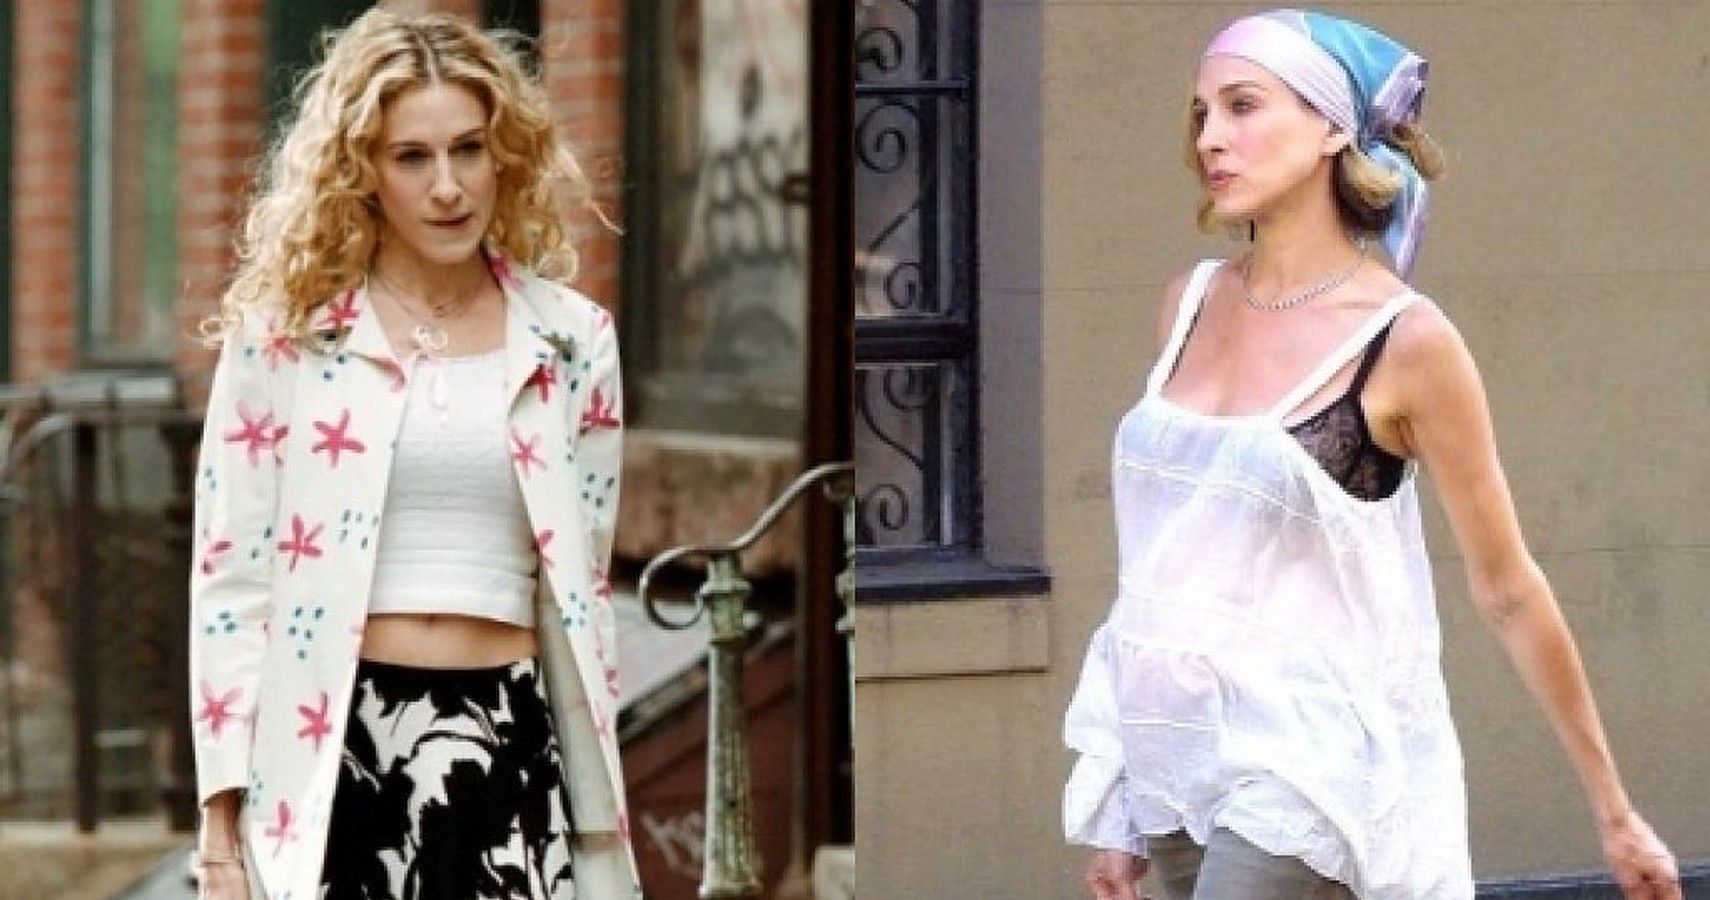 Sex And The City 5 Outfits That Are Totally 90s And 5 That Work Today